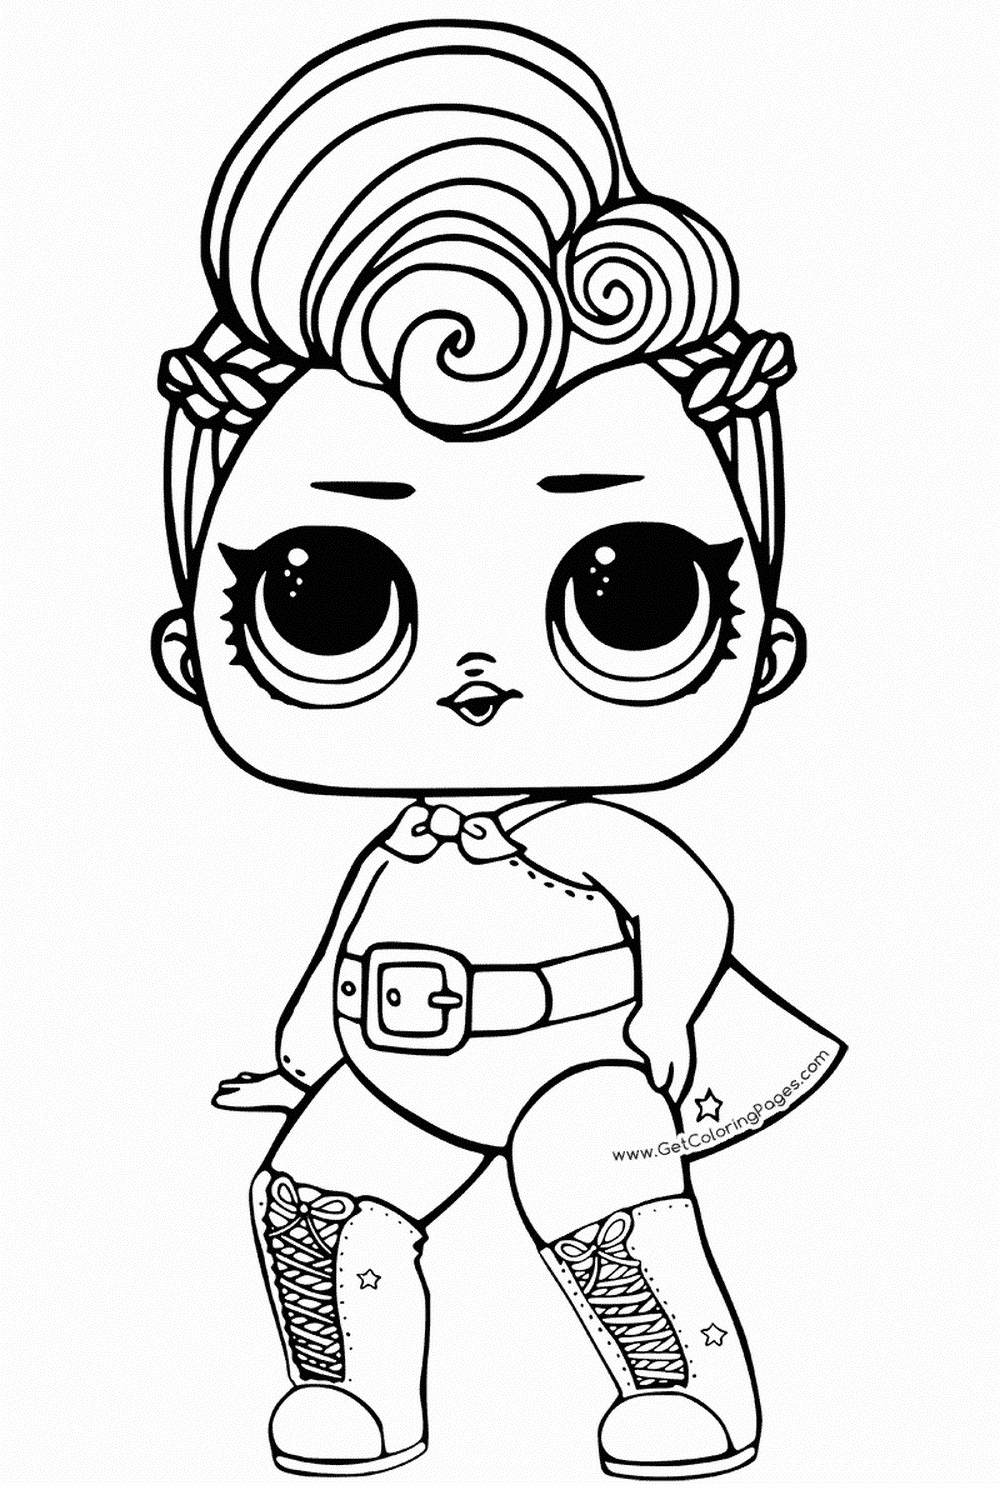 LOL Coloring Pages FREE Printable 61